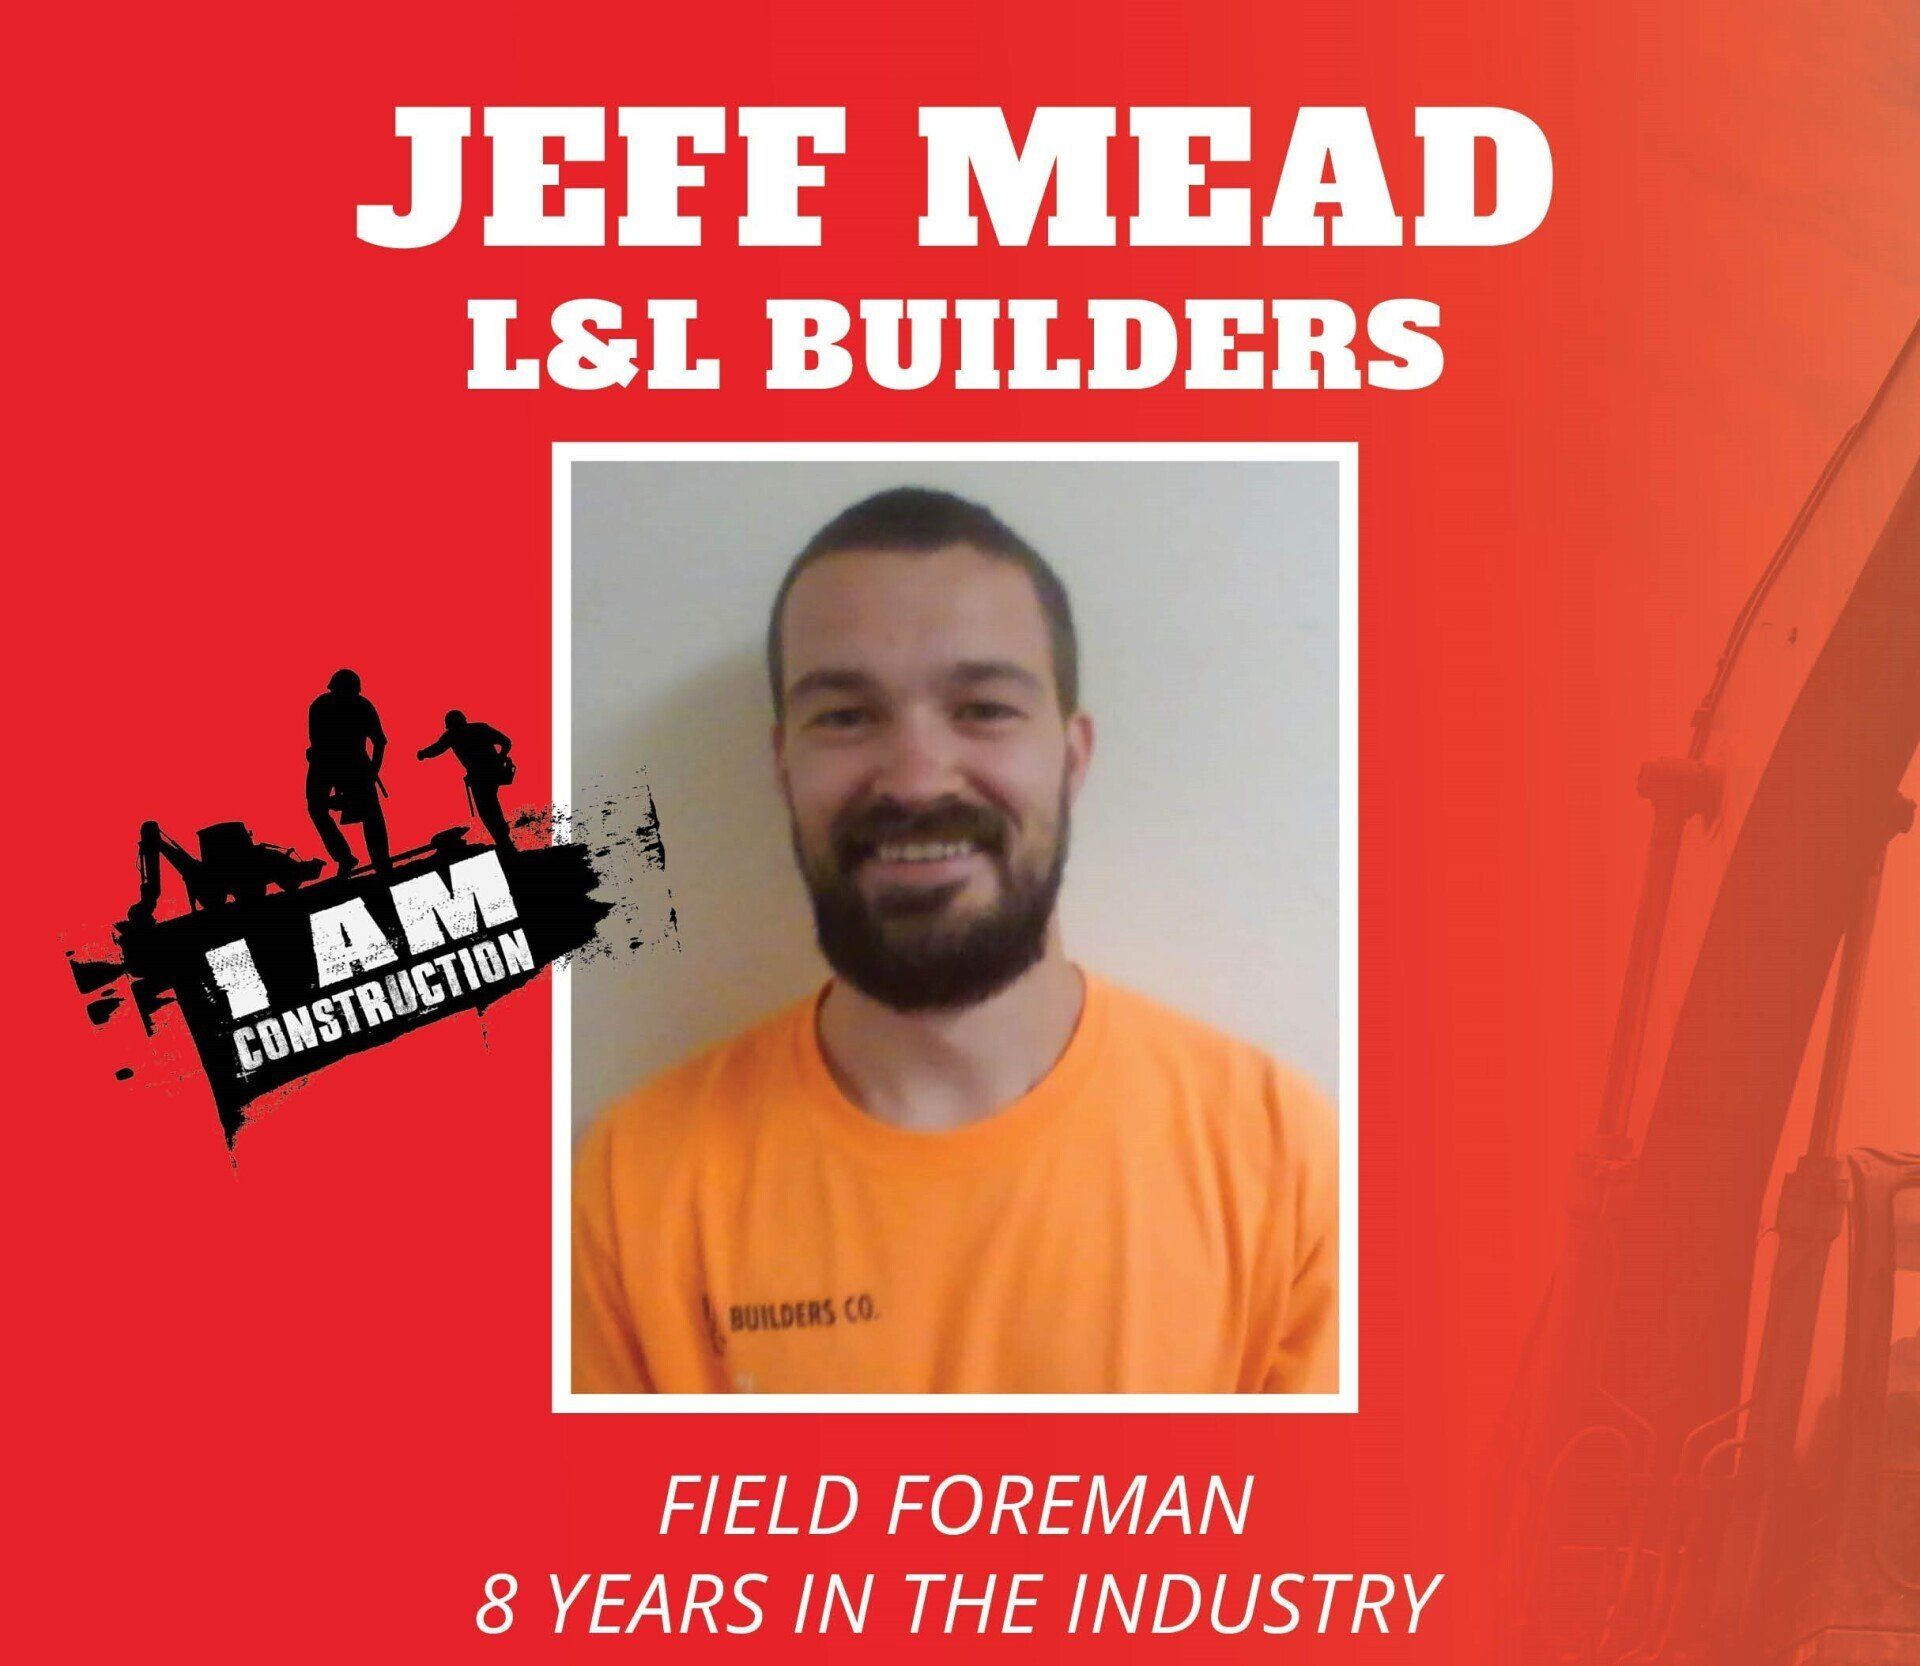 Field Foreman — Sioux City, IA — L&L Builders Co.Field Staff Award — Sioux City, IA — L&L Builders Co.